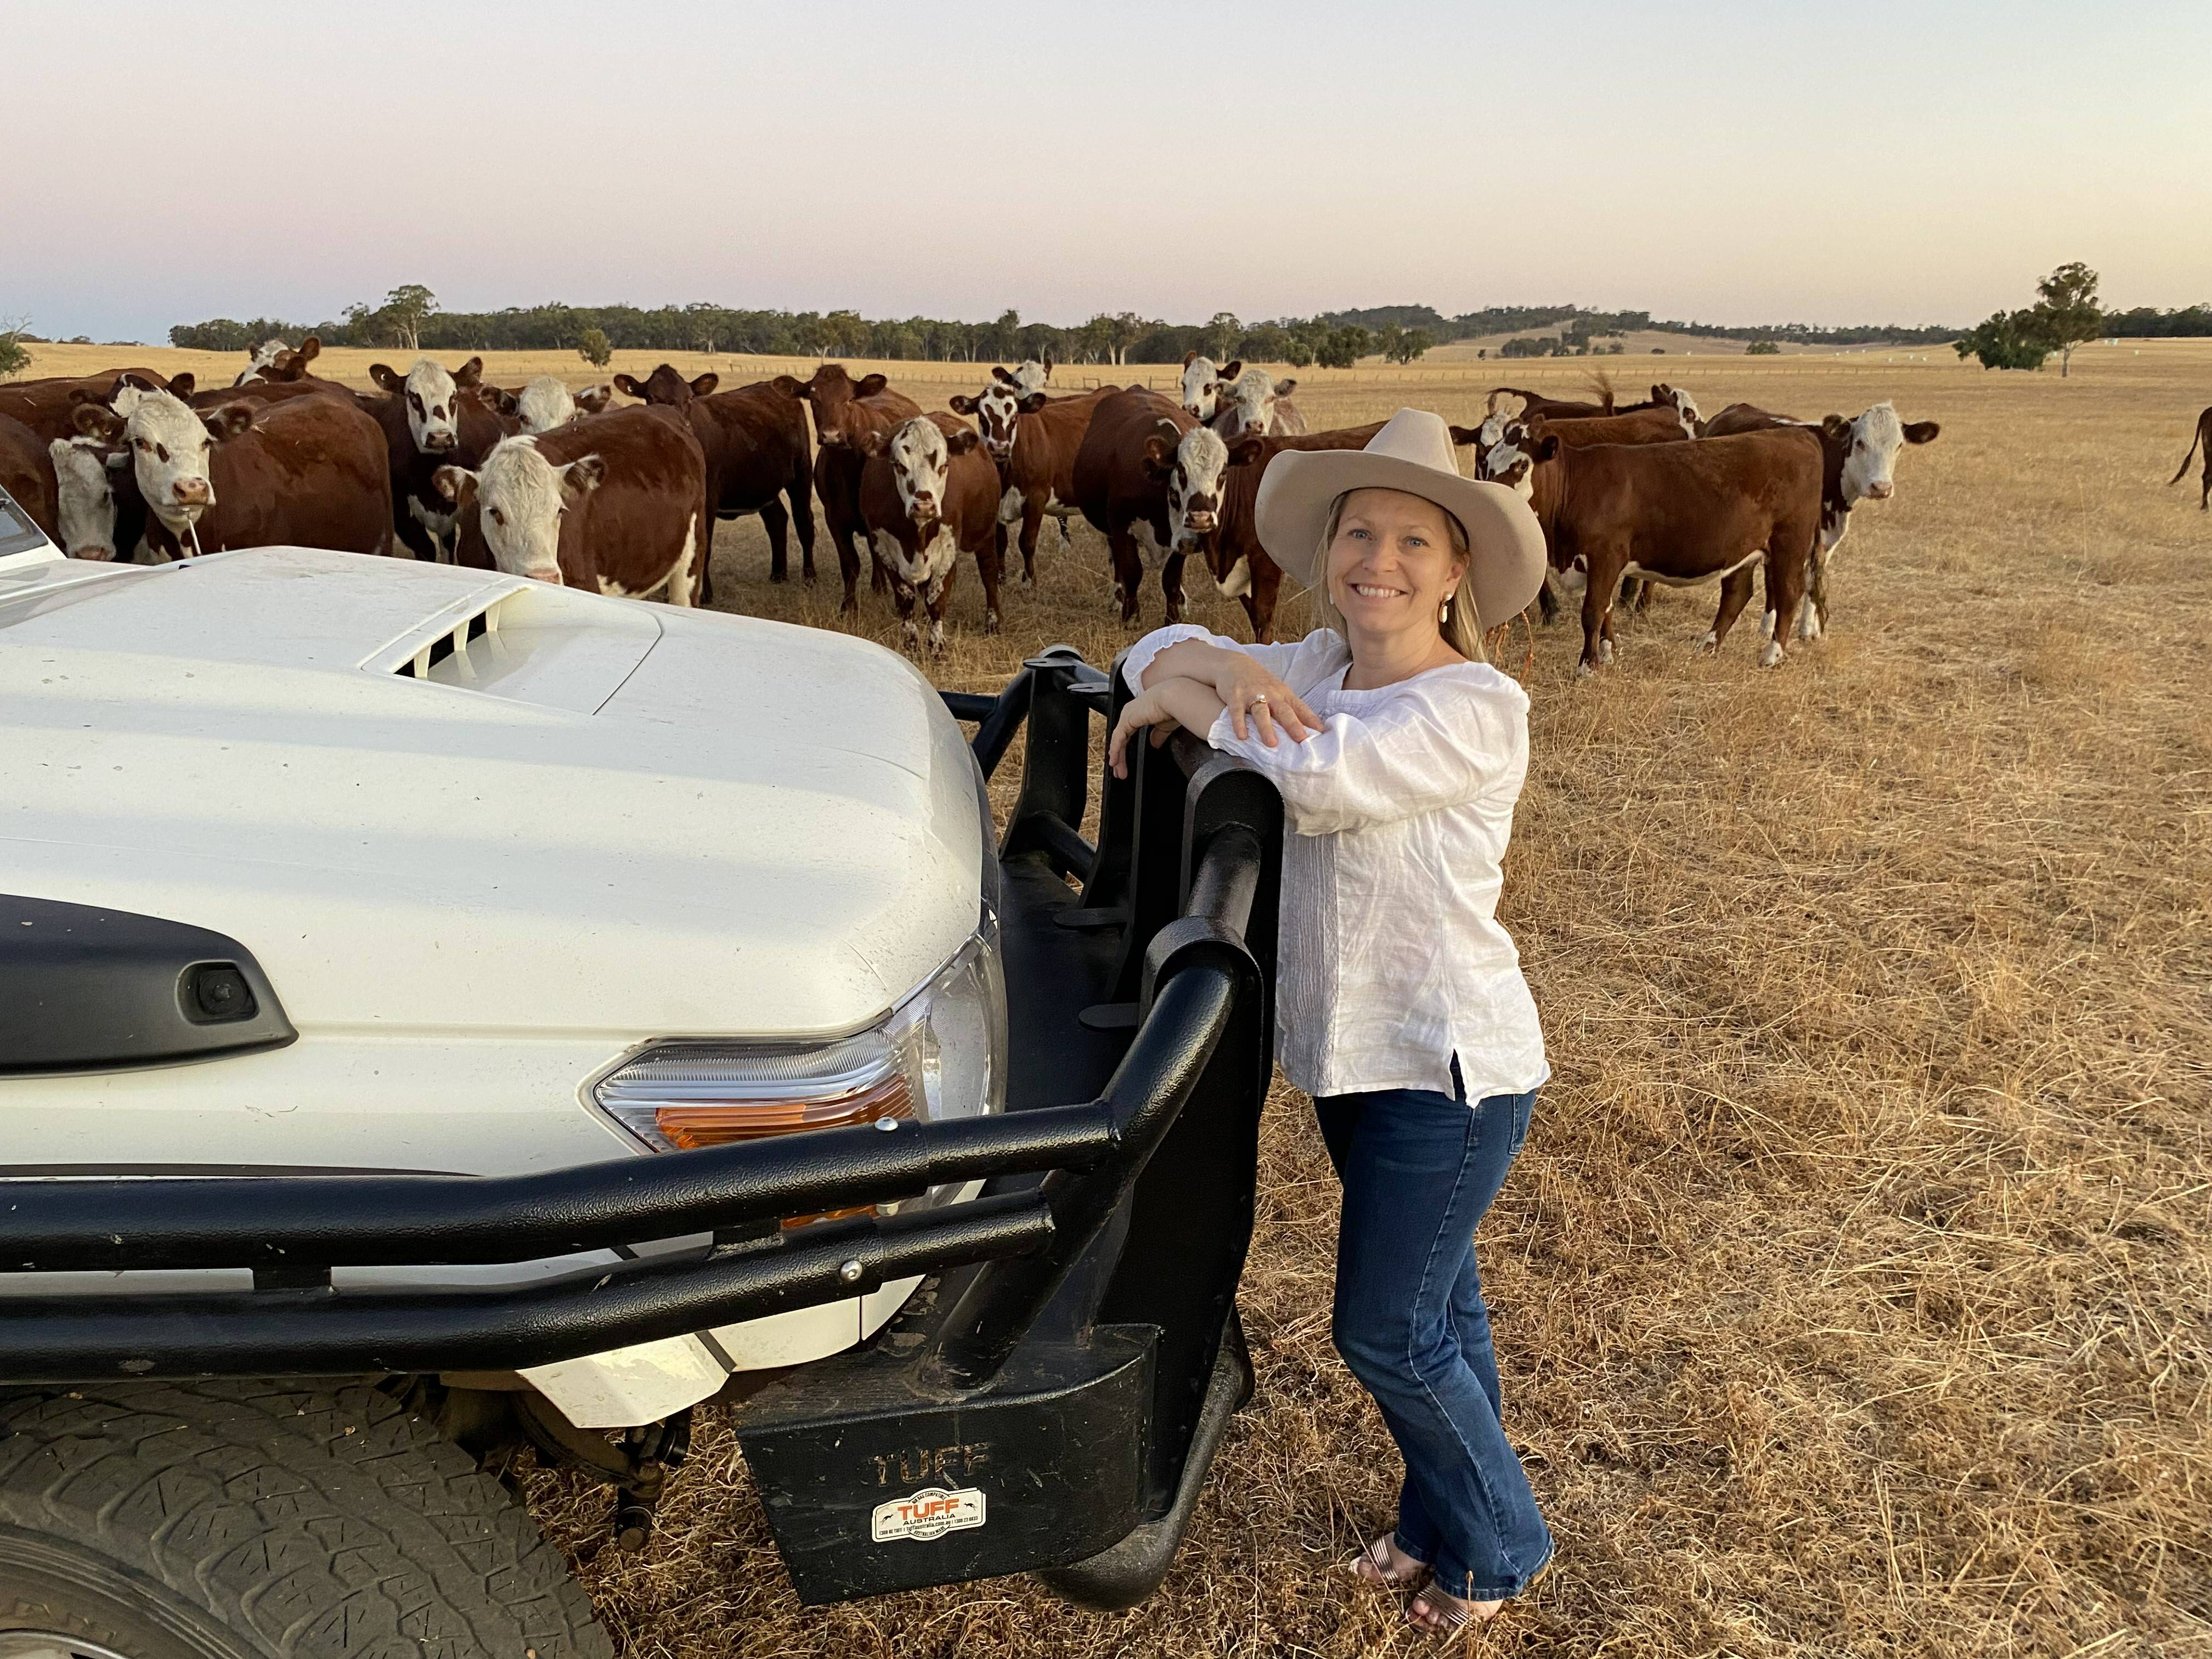 Kids, Cows and Grass: Supermarket beef is raised by farm families!